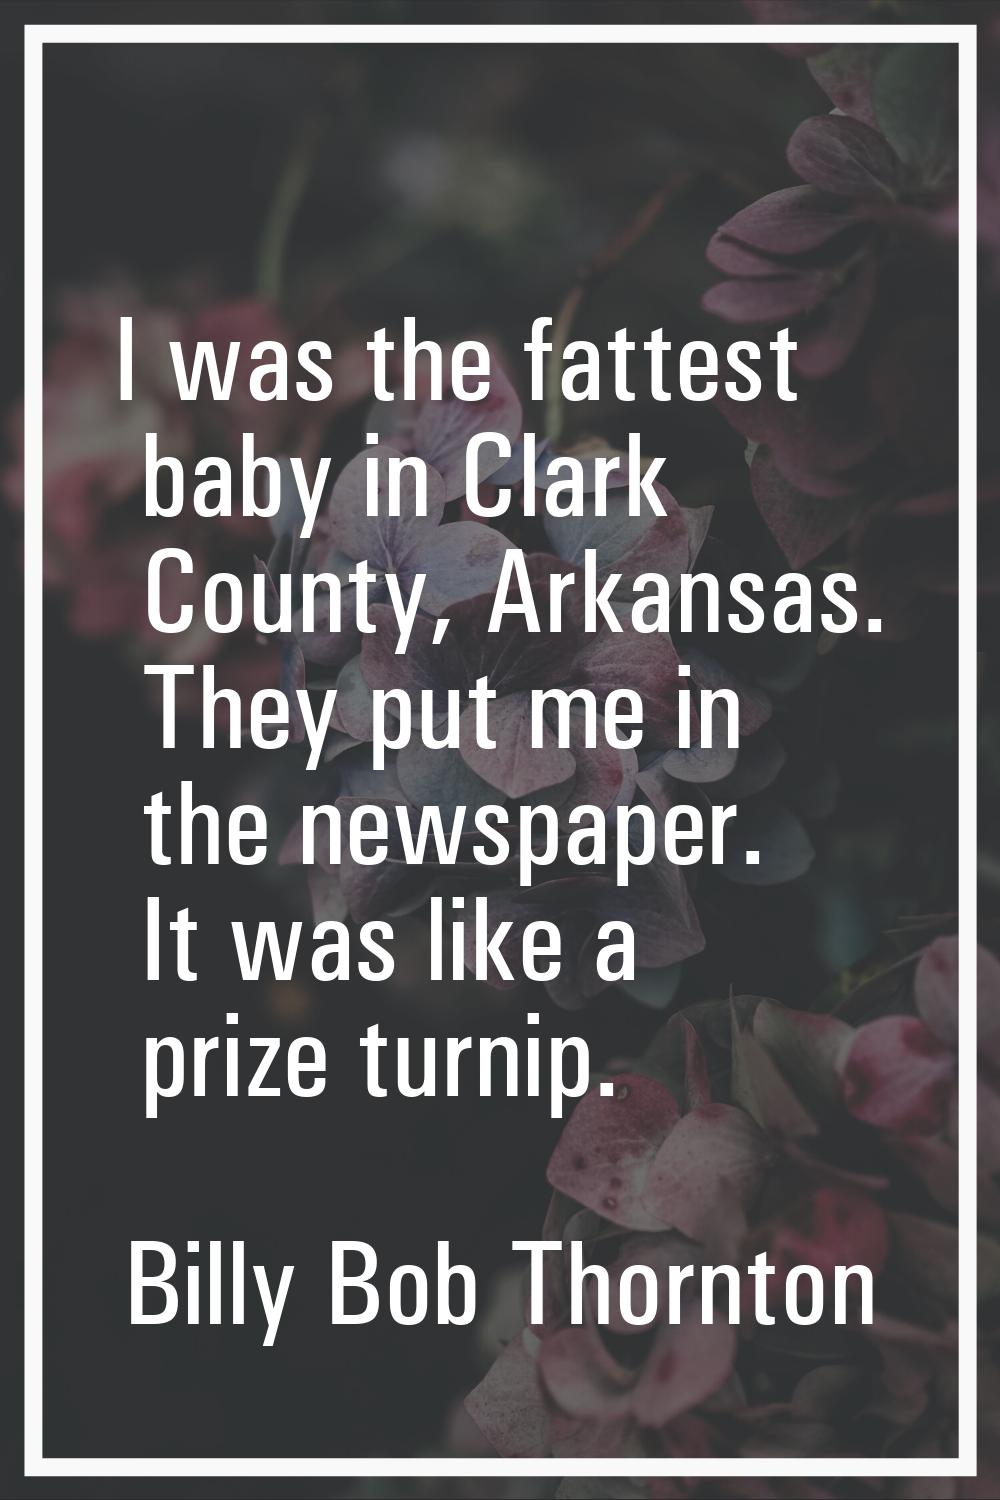 I was the fattest baby in Clark County, Arkansas. They put me in the newspaper. It was like a prize